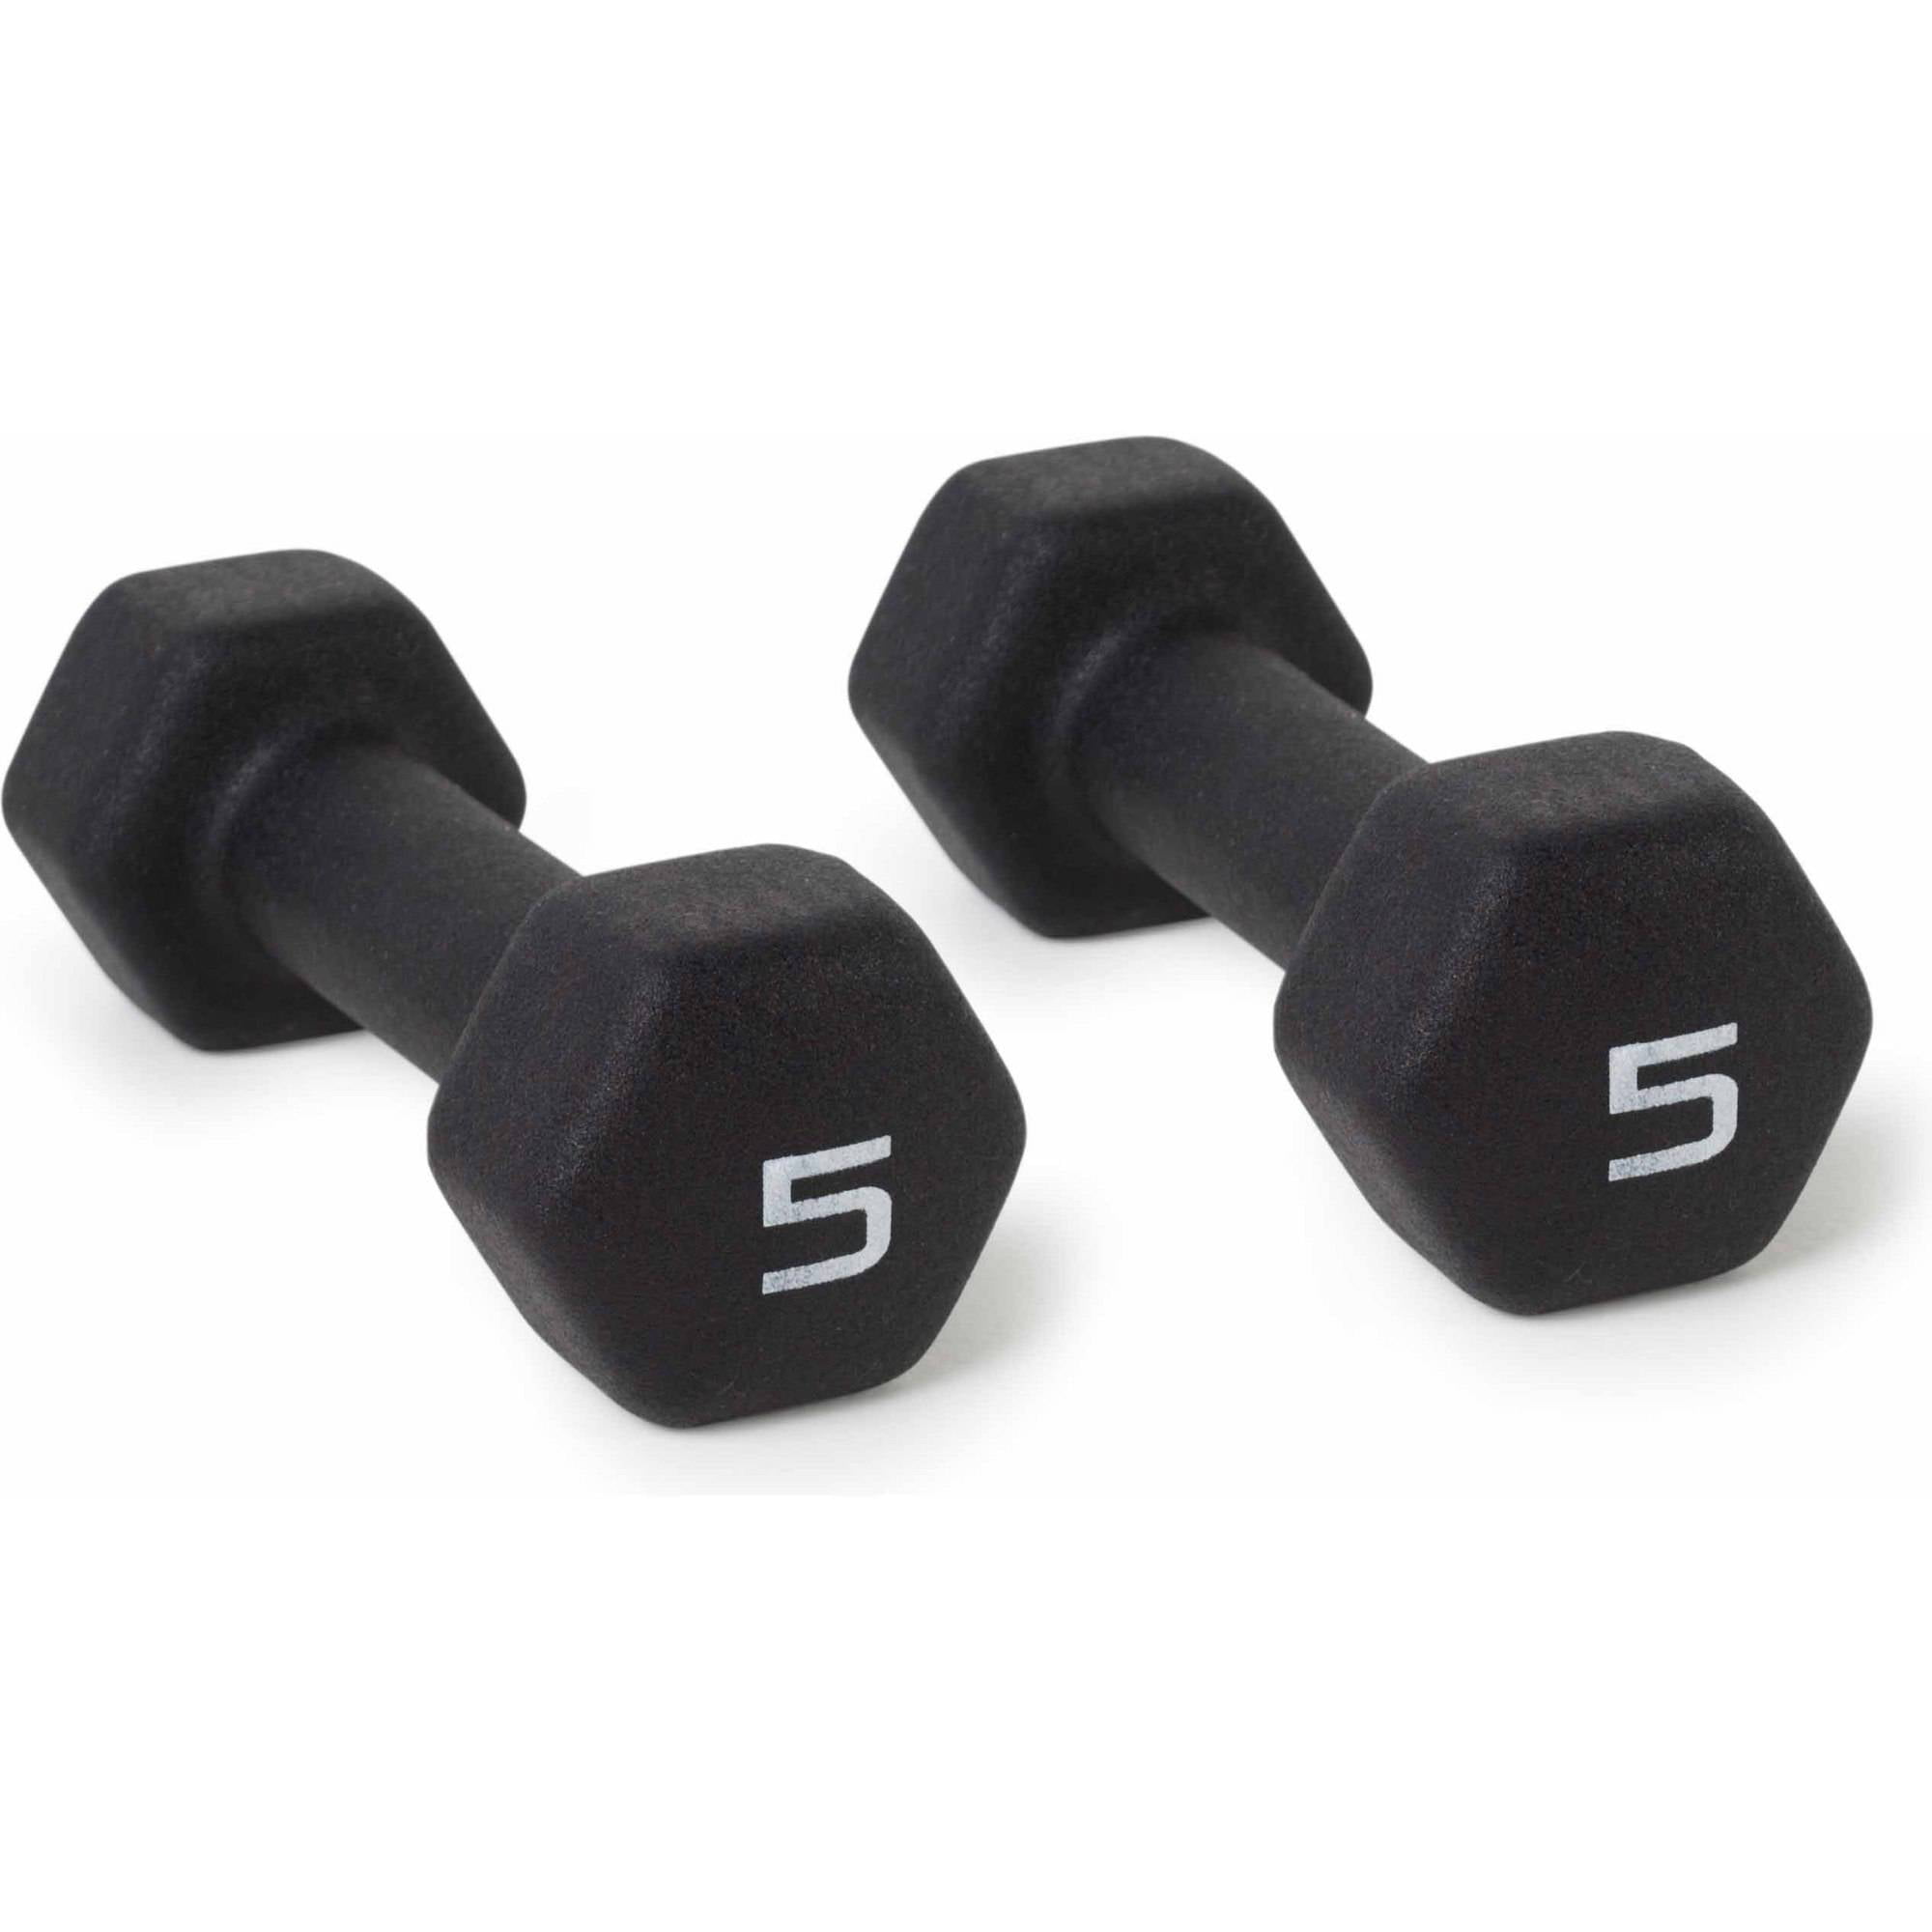 CAP Neoprene Dumbbells 10LB and 8LB Pound Pairs Bundle Hex Weights Dumbells 